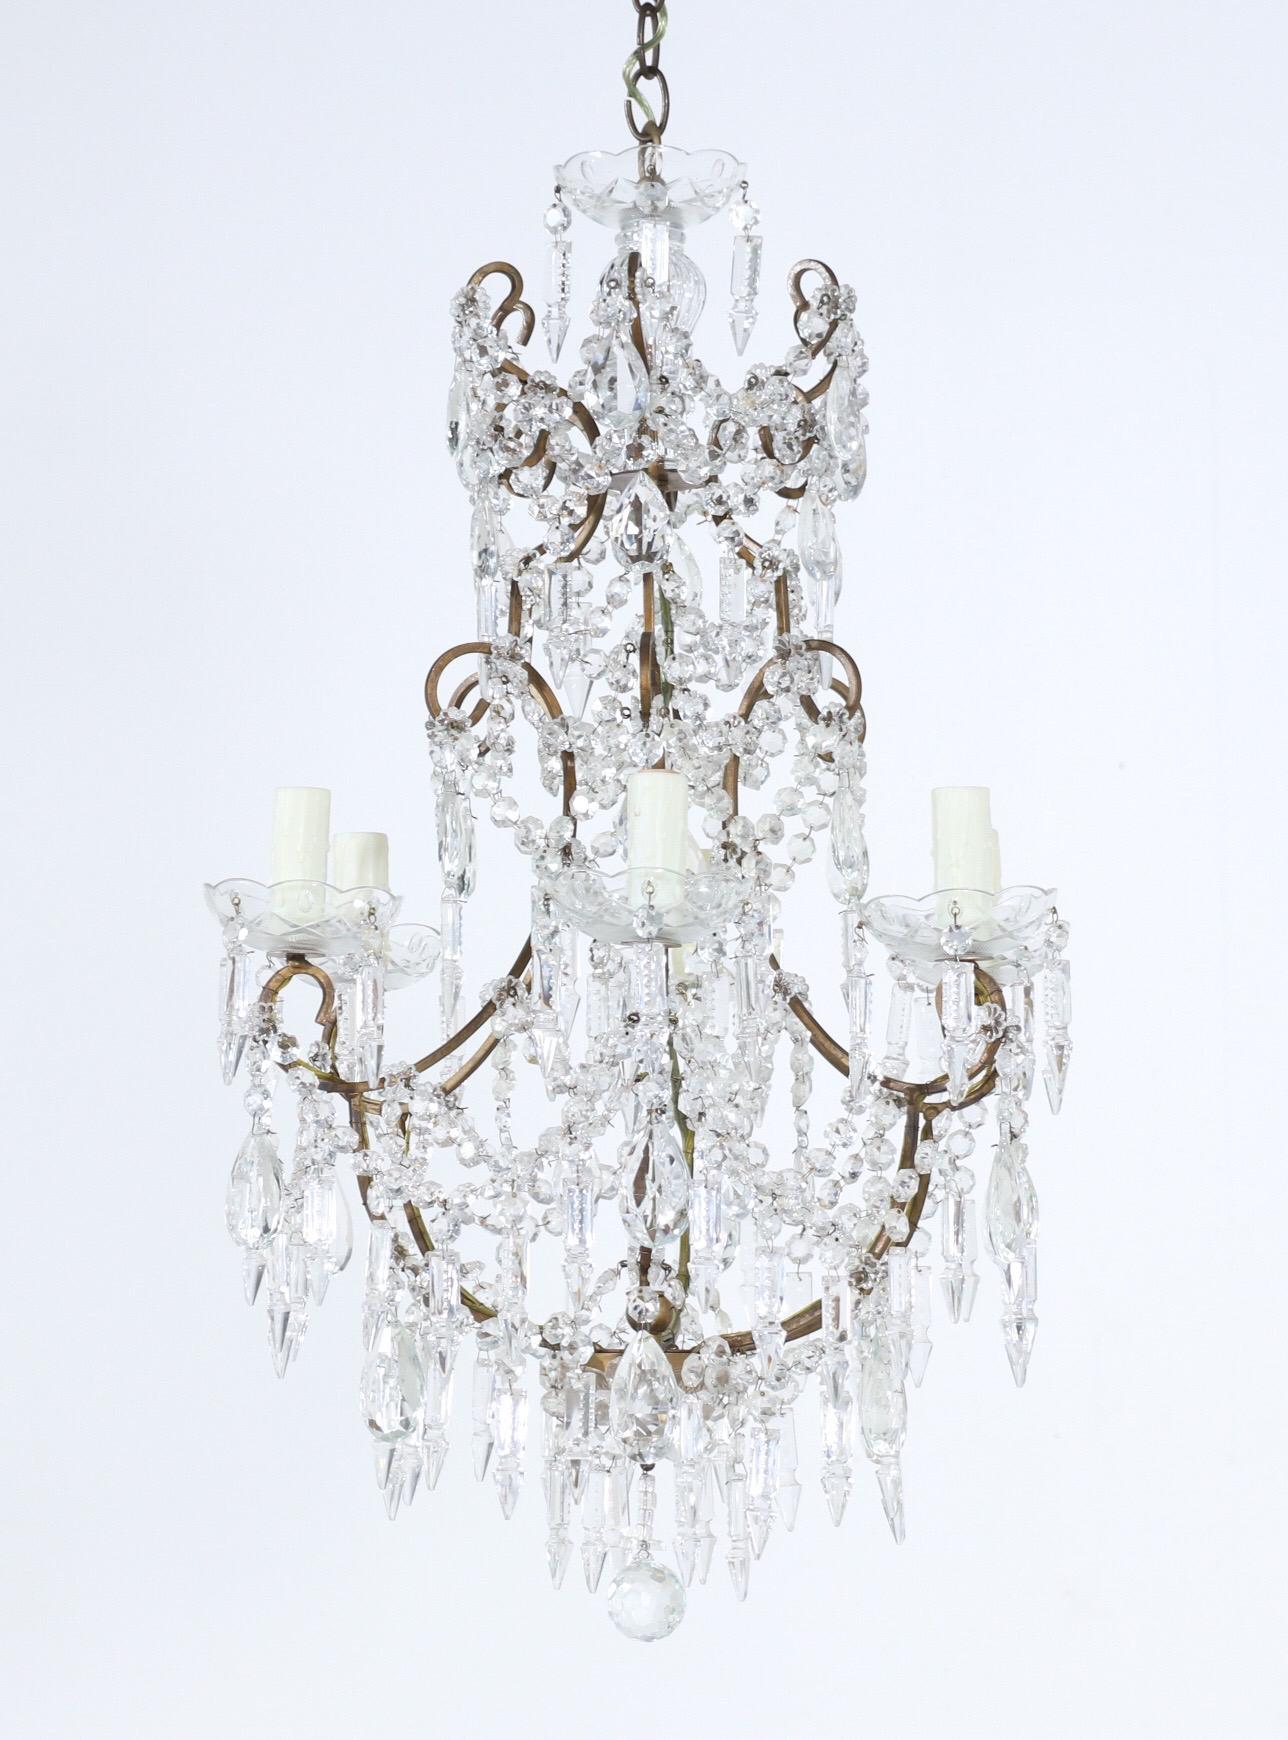 Sparkling, Italian 1950s gilt-iron and crystal beaded chandelier.

The chandelier consists of a scrolled gilt iron frame which is loaded with crystal bead swags and faceted prisms in an assortment of shapes.

The chandelier is wired and in working